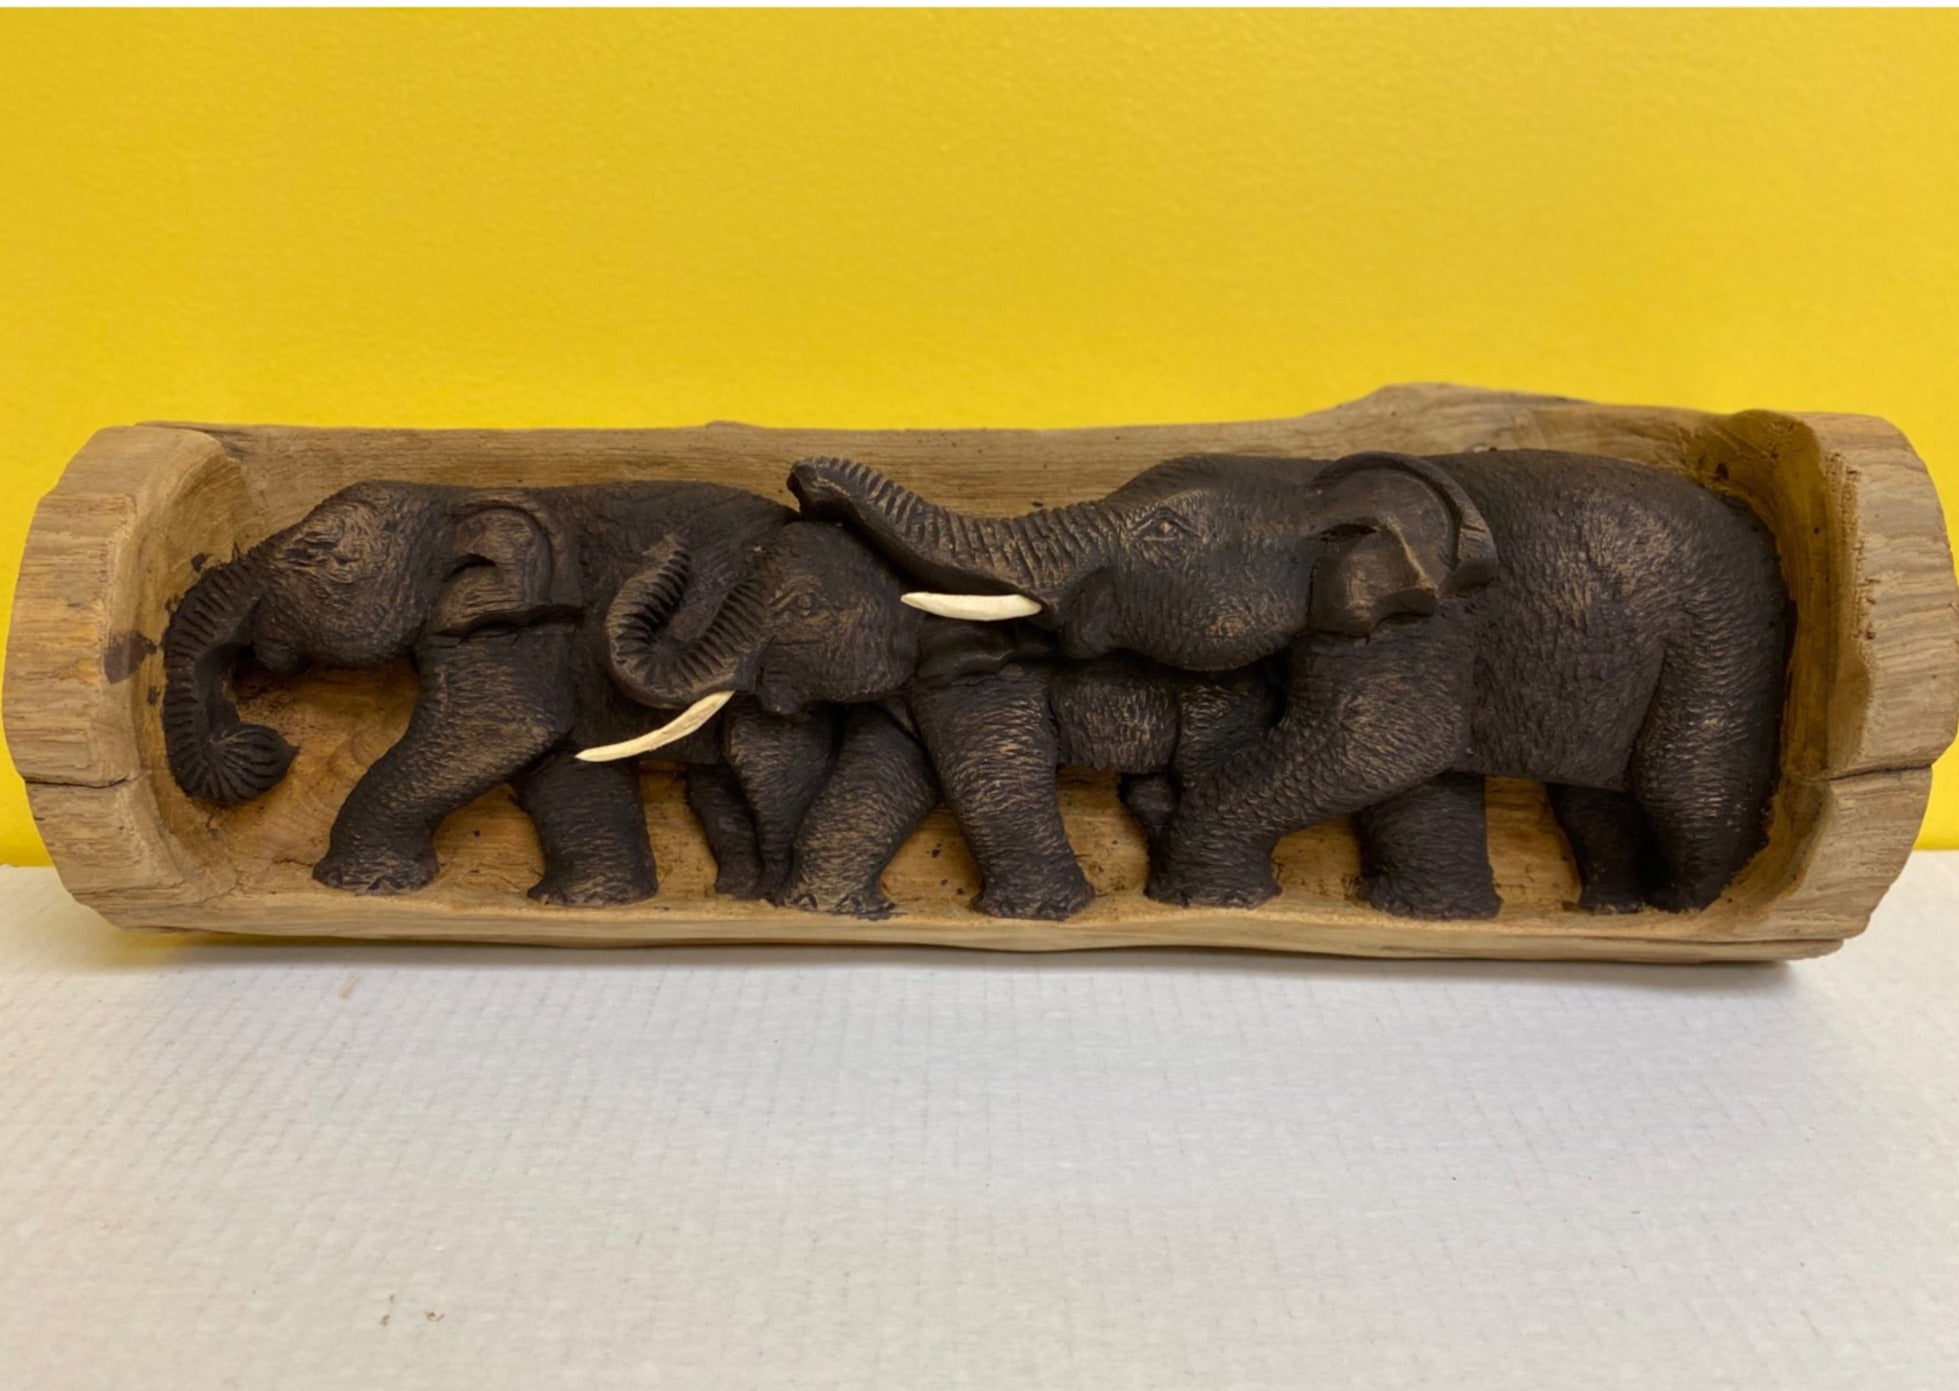 Teak Wood Carving Of Three Elephants Family Natural Art Hand Carved Elephant Home Decor Wall Hanging 